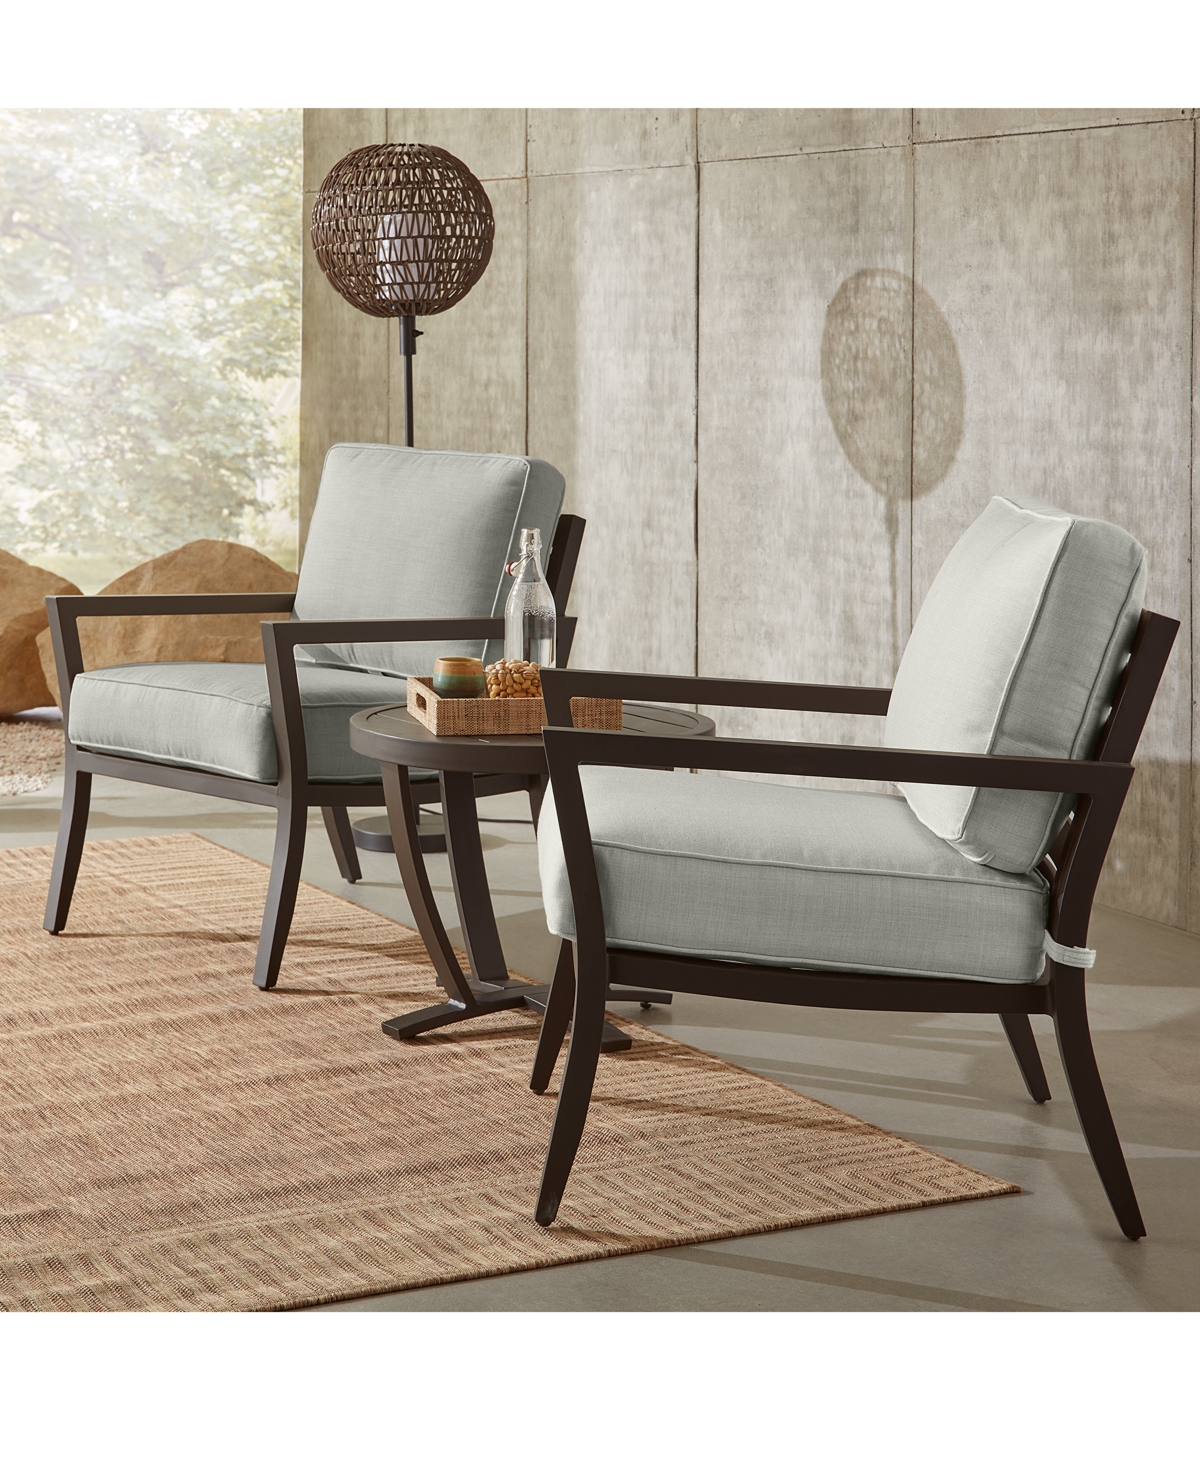 Shop Agio Astaire Outdoor 3-pc Lounge Chair Set (2 Lounge Chairs + 1 End Table) In Peony Brick Red